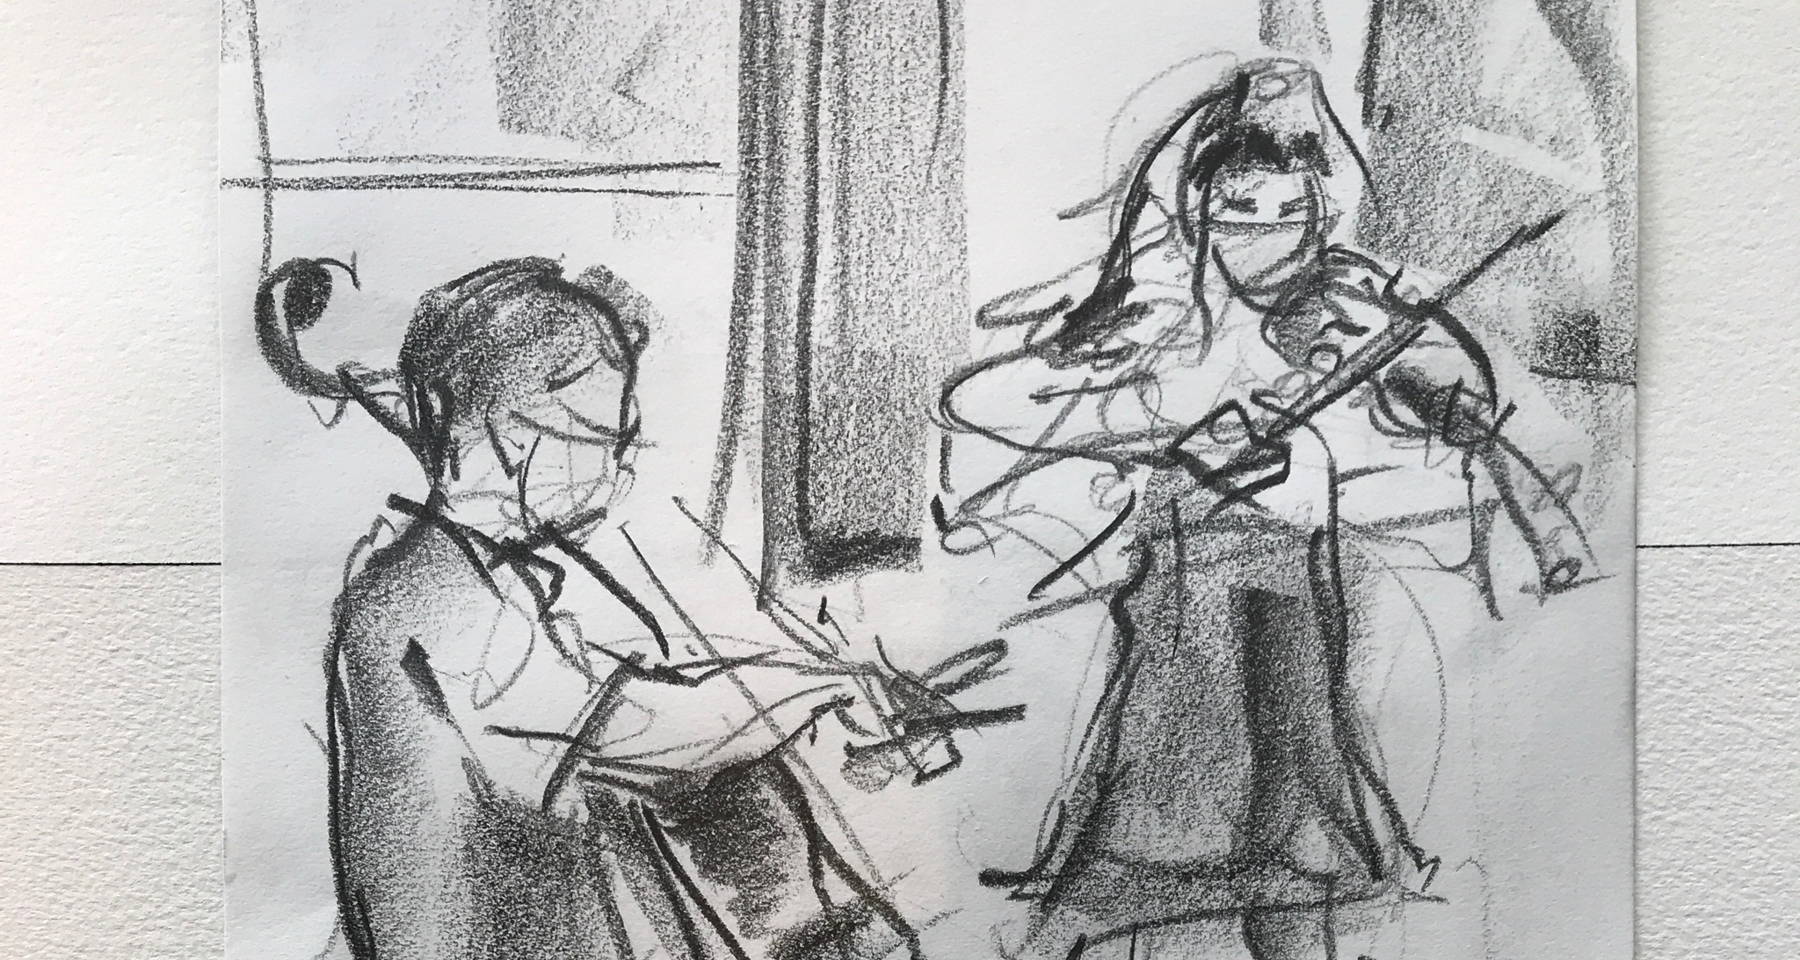 Parallel Play! Violin, Cello, and 2 Visual Artists Live From an Art Studio